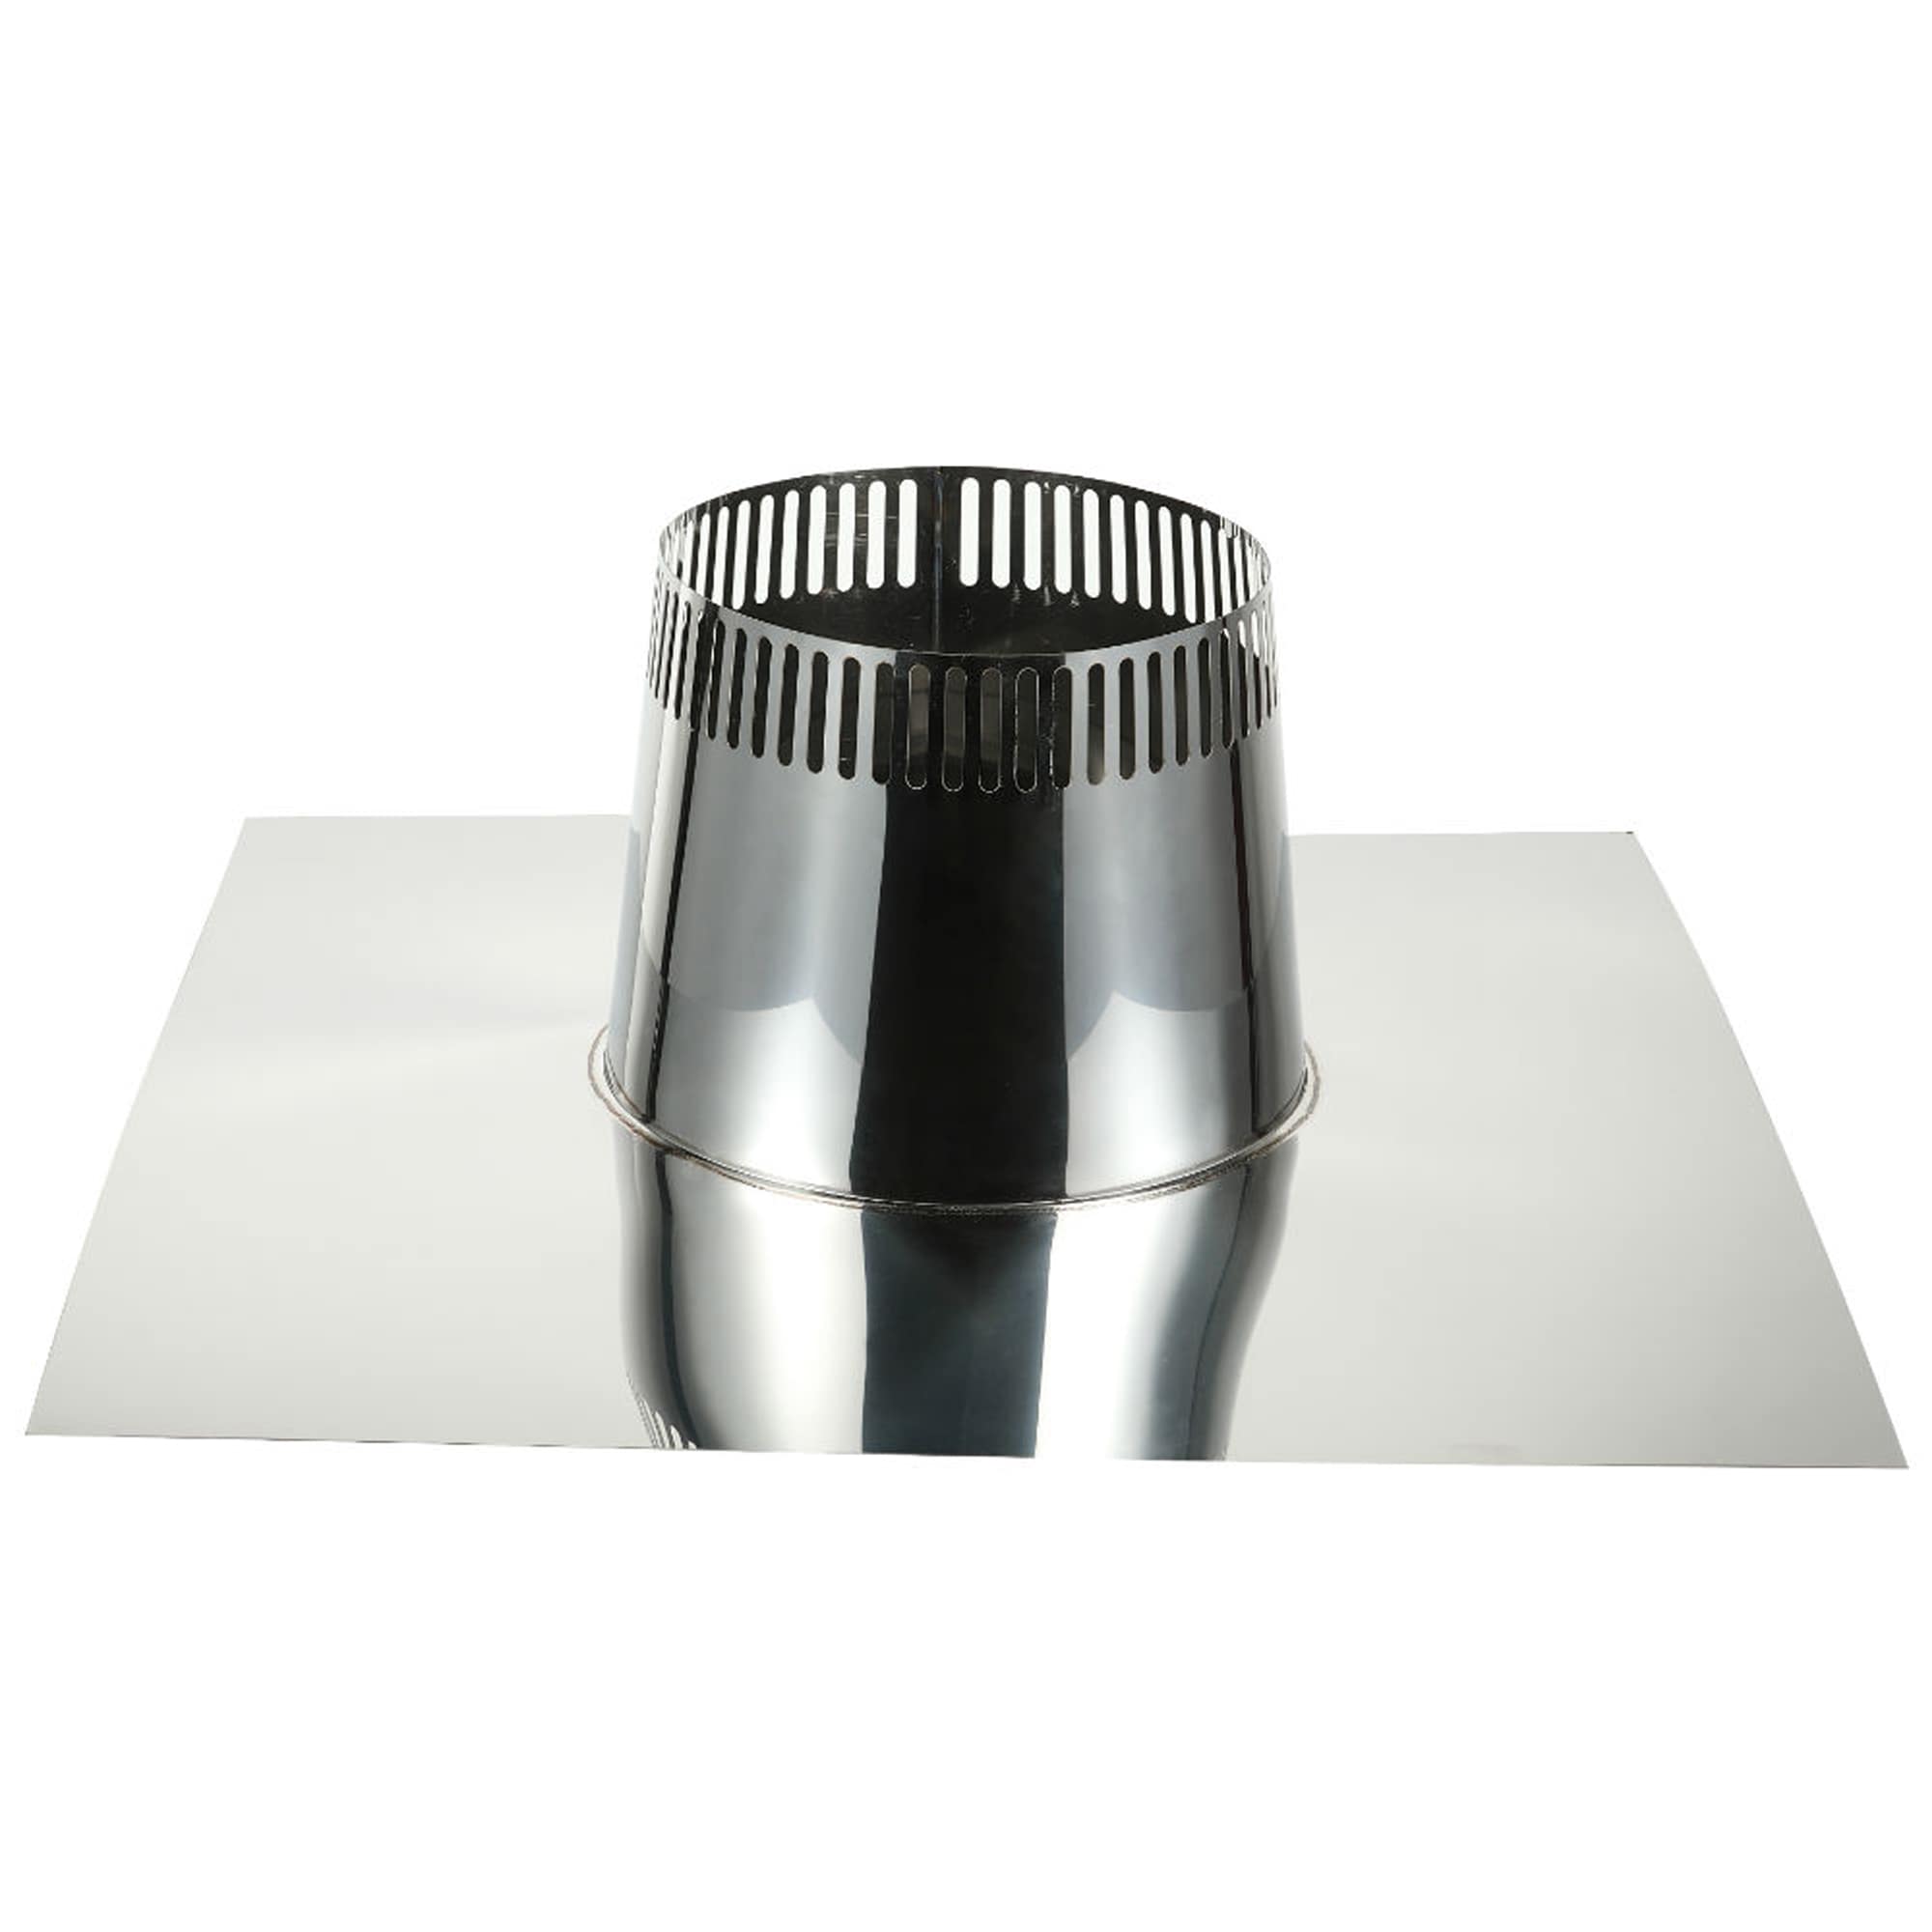 AllFuel HST 6 Cleanout Tee Chimney Pipe Accessory Kit for Installation in  the Chimney Pipe Accessory Kits department at